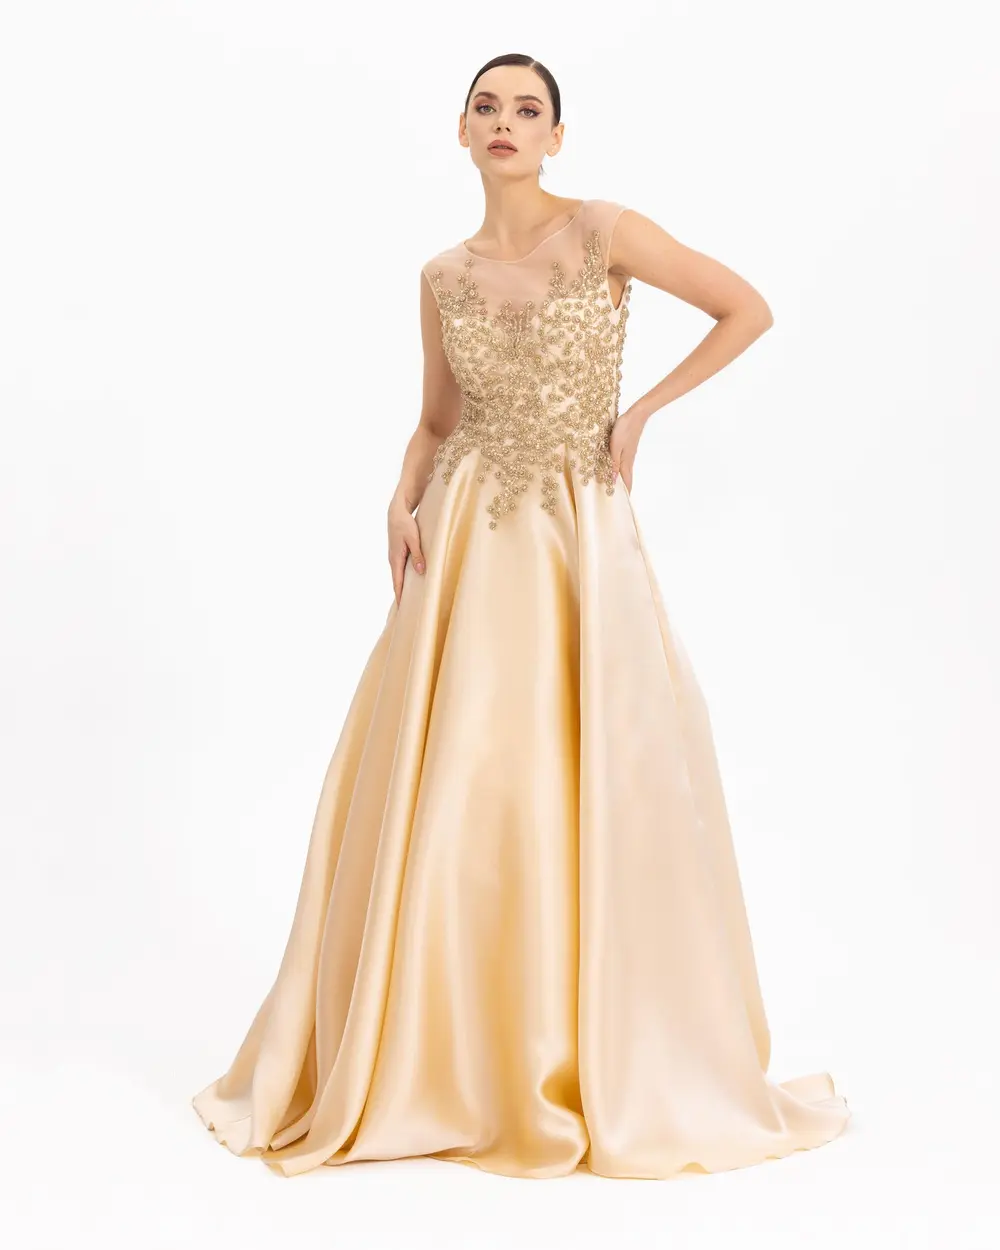 Mermaid Gold Long Evening Formal Dress Off the Shoulder Party Prom Gown  Custom | eBay